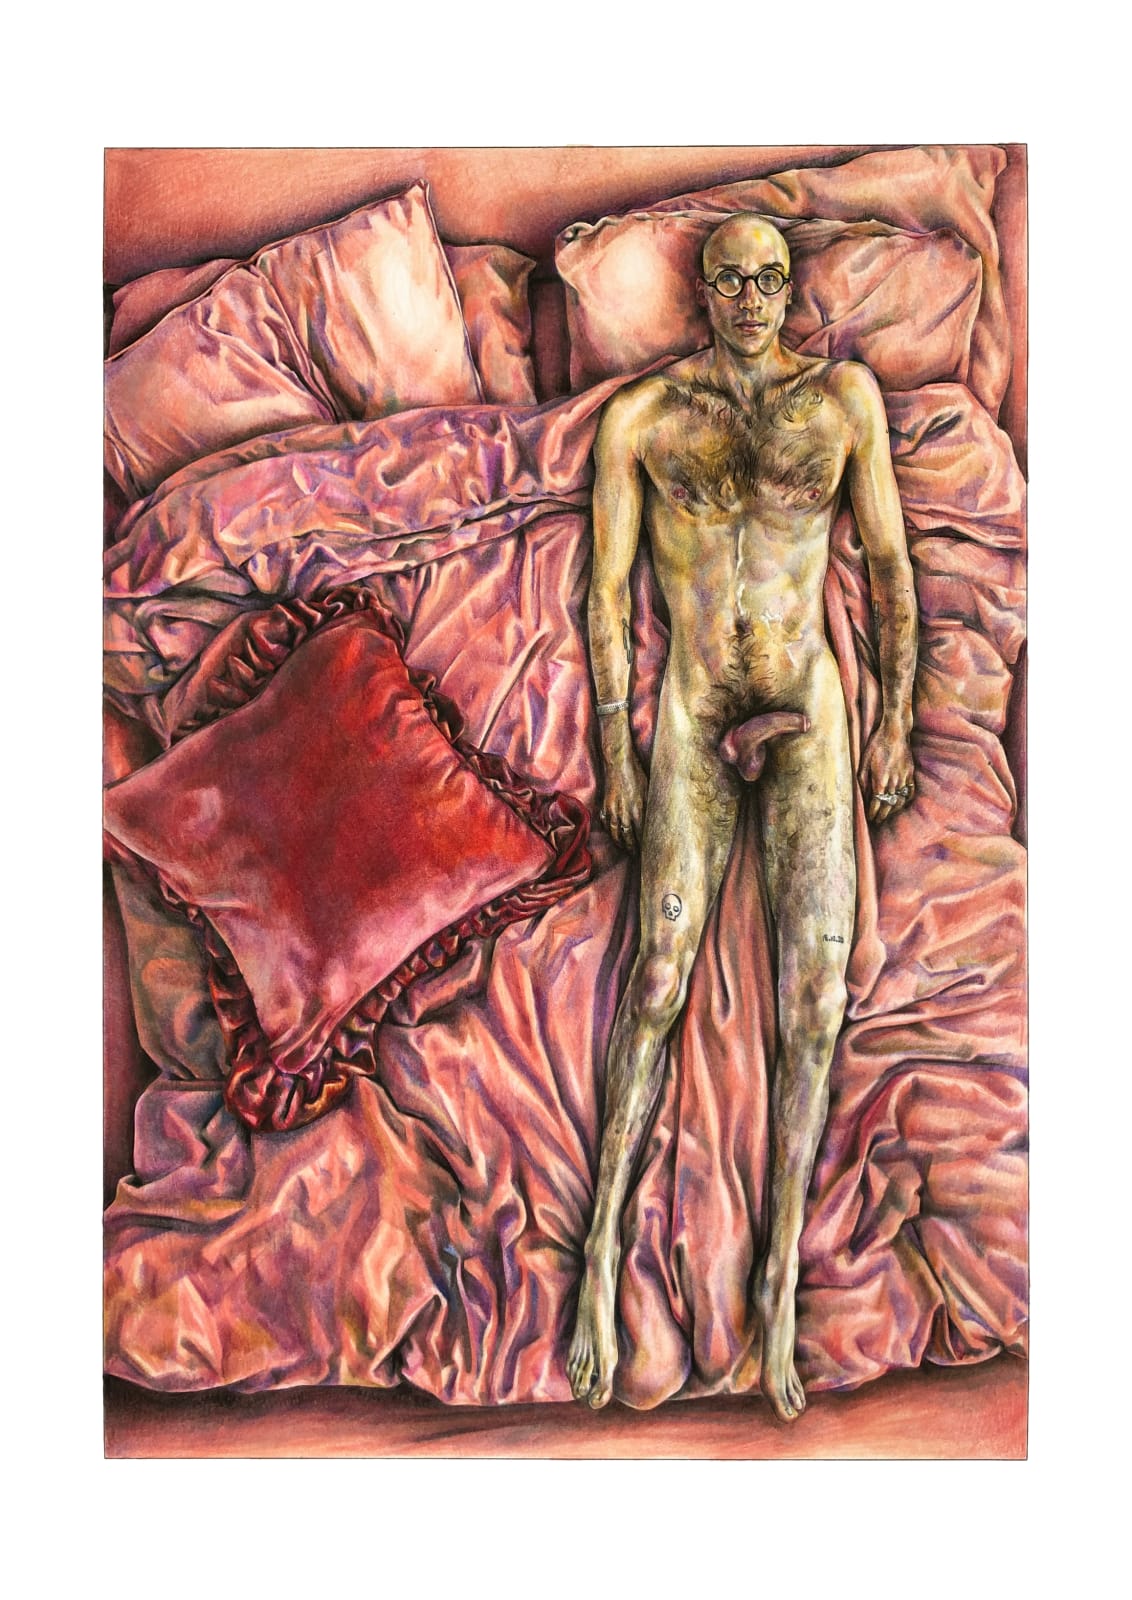 Ian Bruce, On The Bed